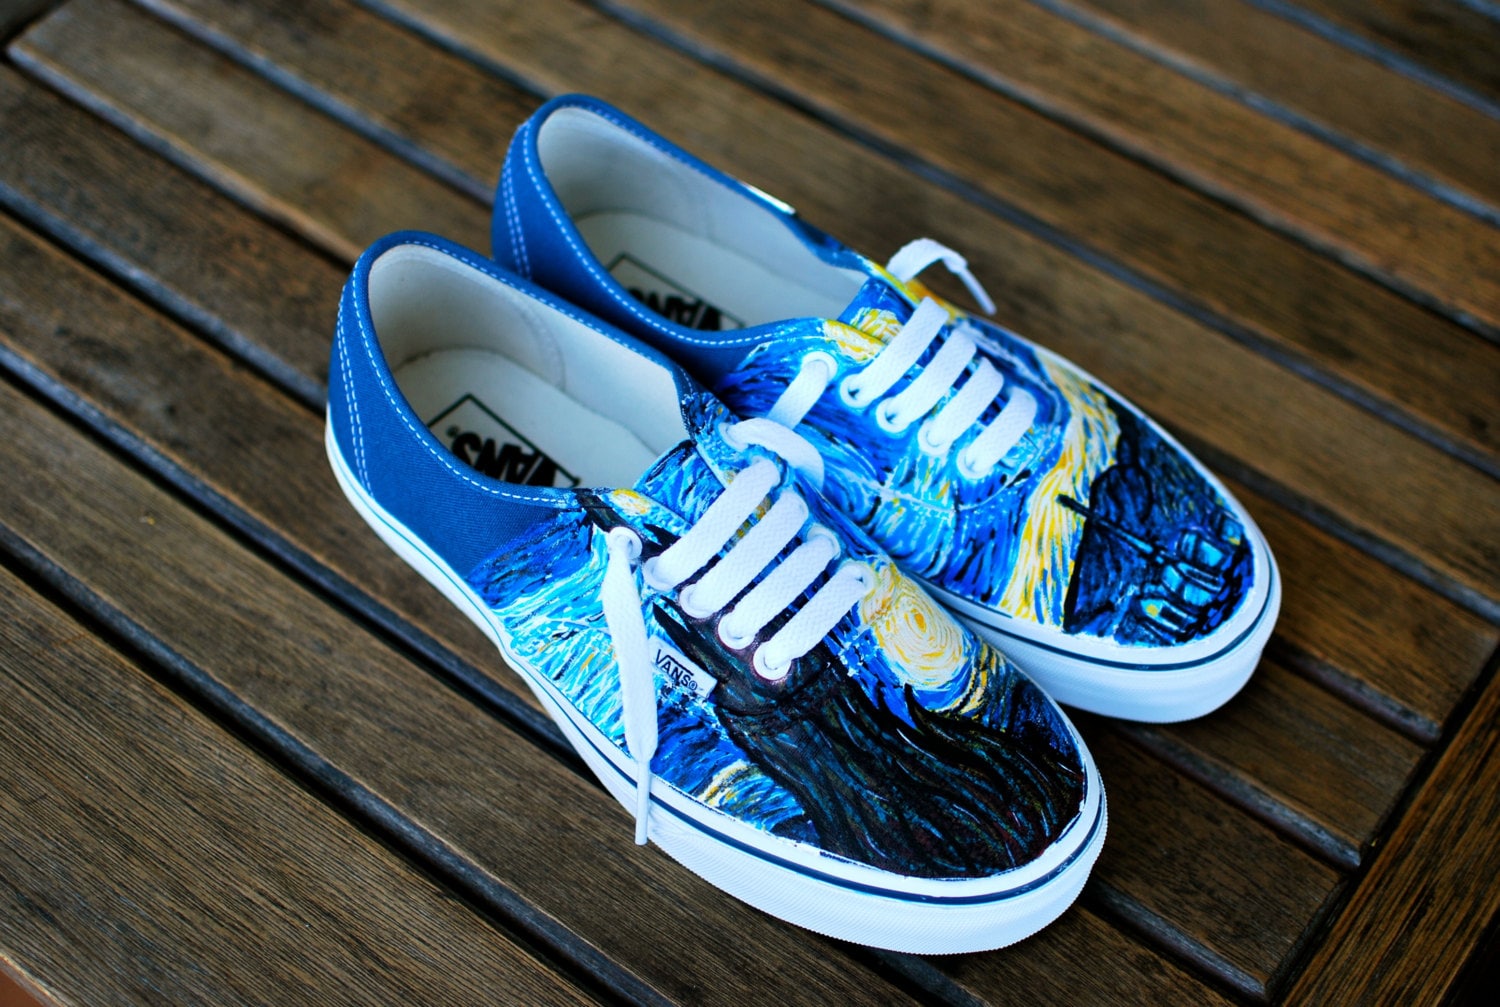 Hand Painted Starry Night Navy Vans Authentic Custom Vincent